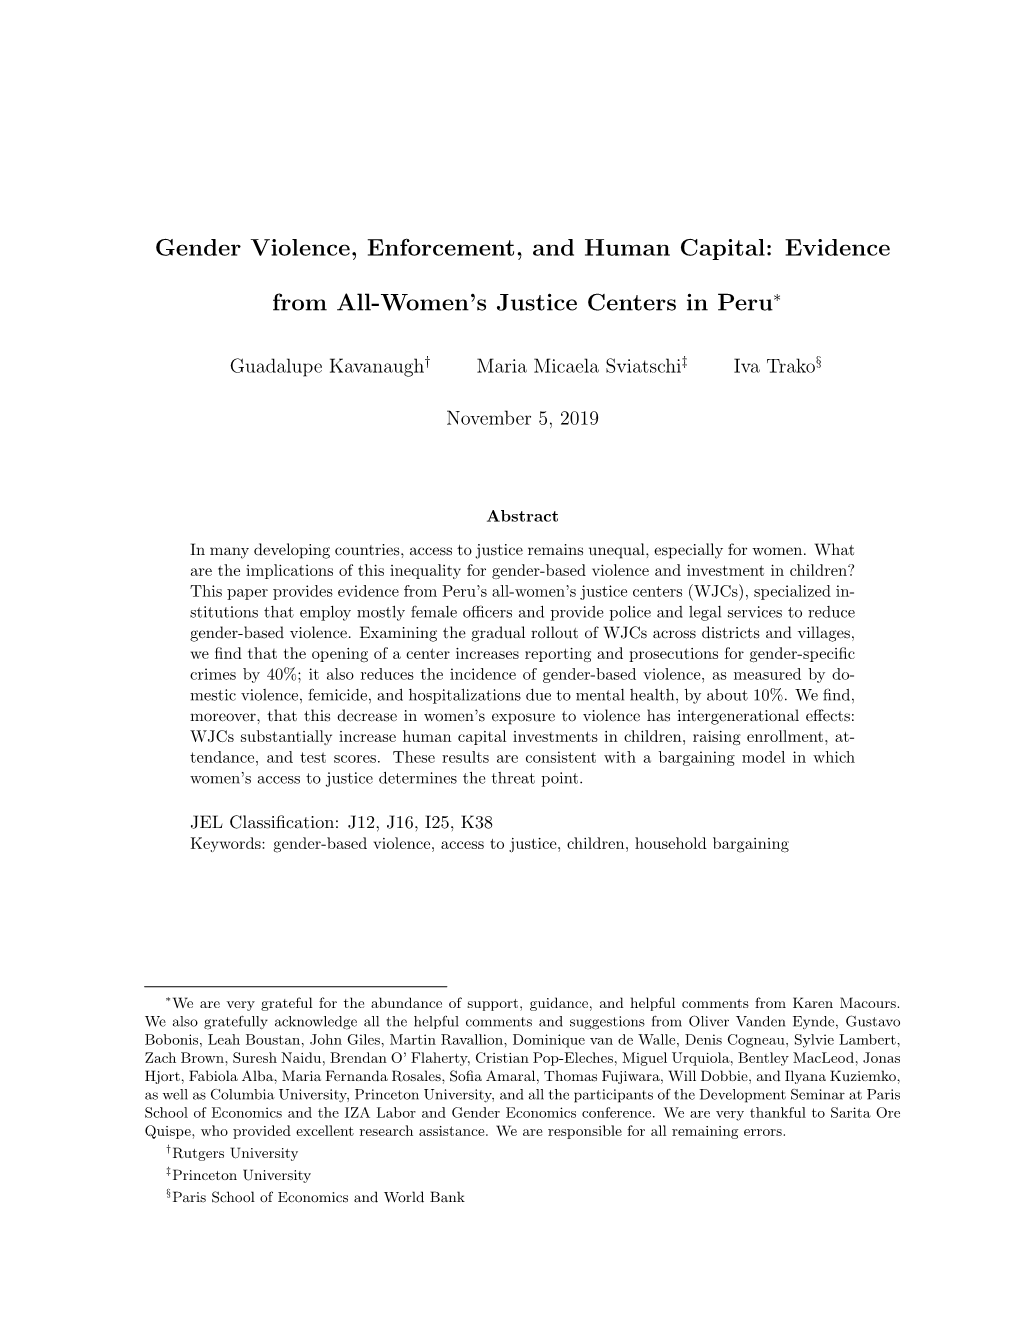 Gender Violence, Enforcement, and Human Capital: Evidence from All